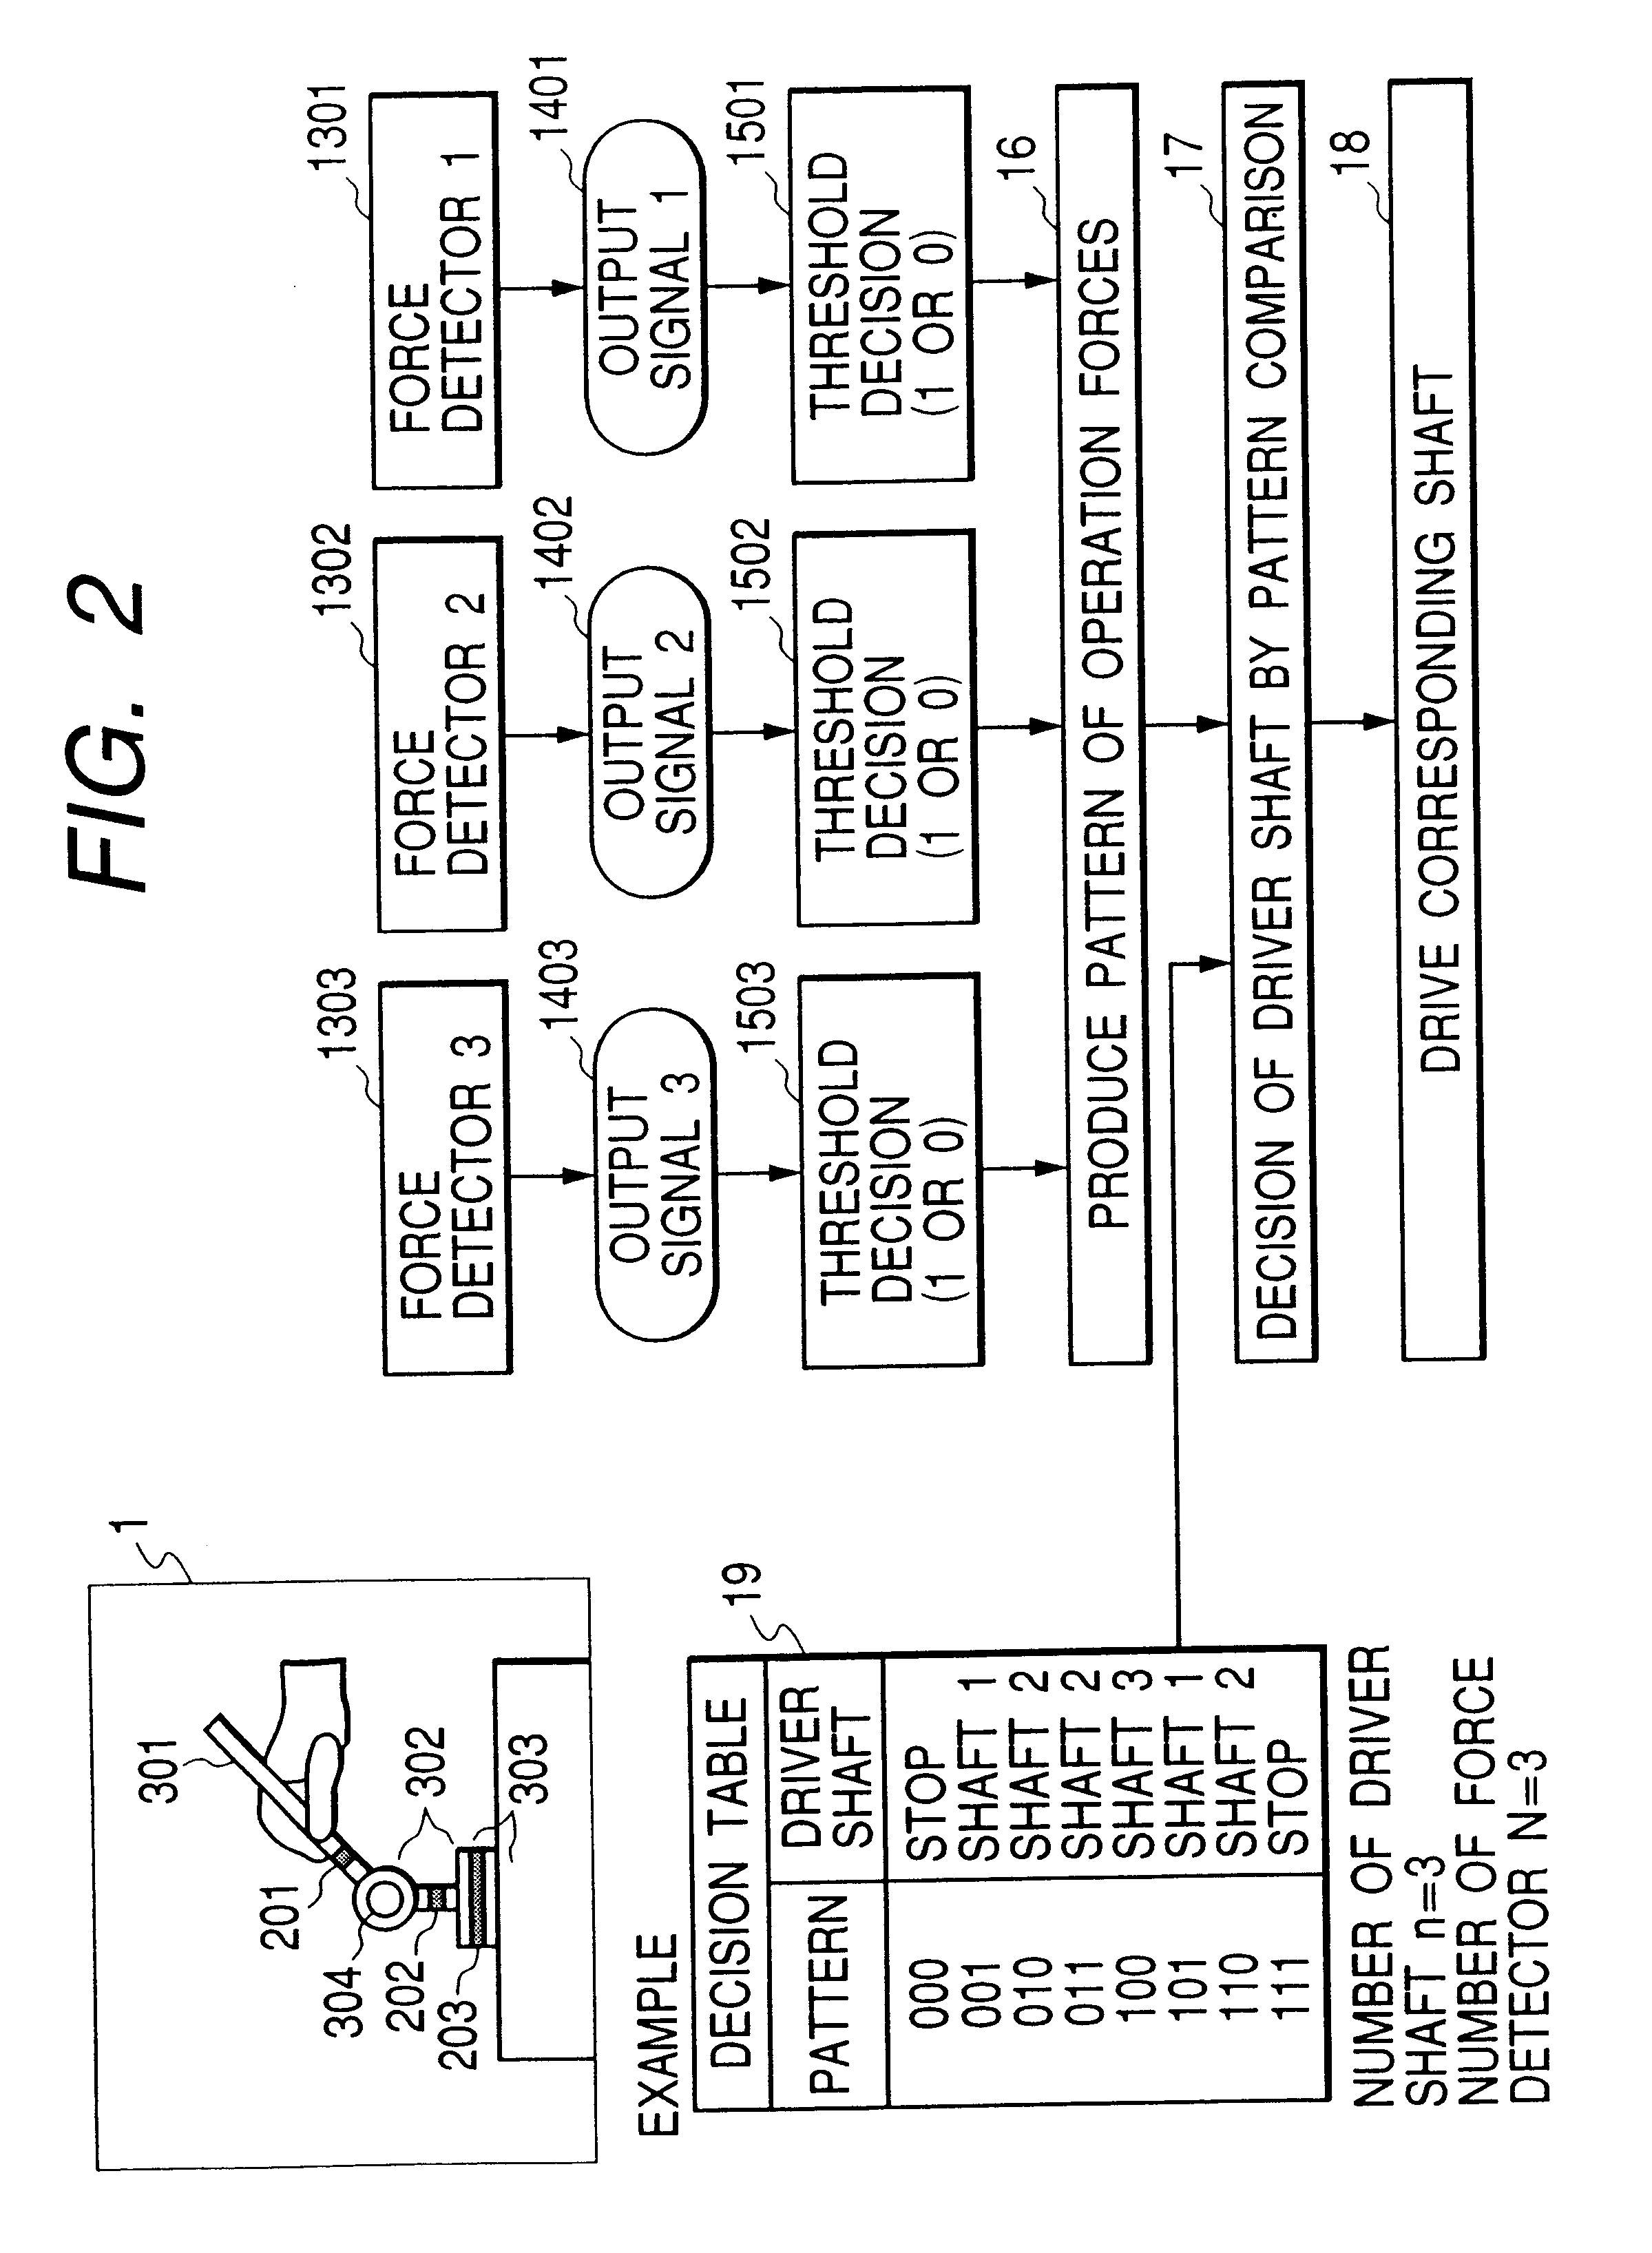 Master-slave manipulator apparatus and method therefor, further training apparatus for manipulator operation input and method therefor